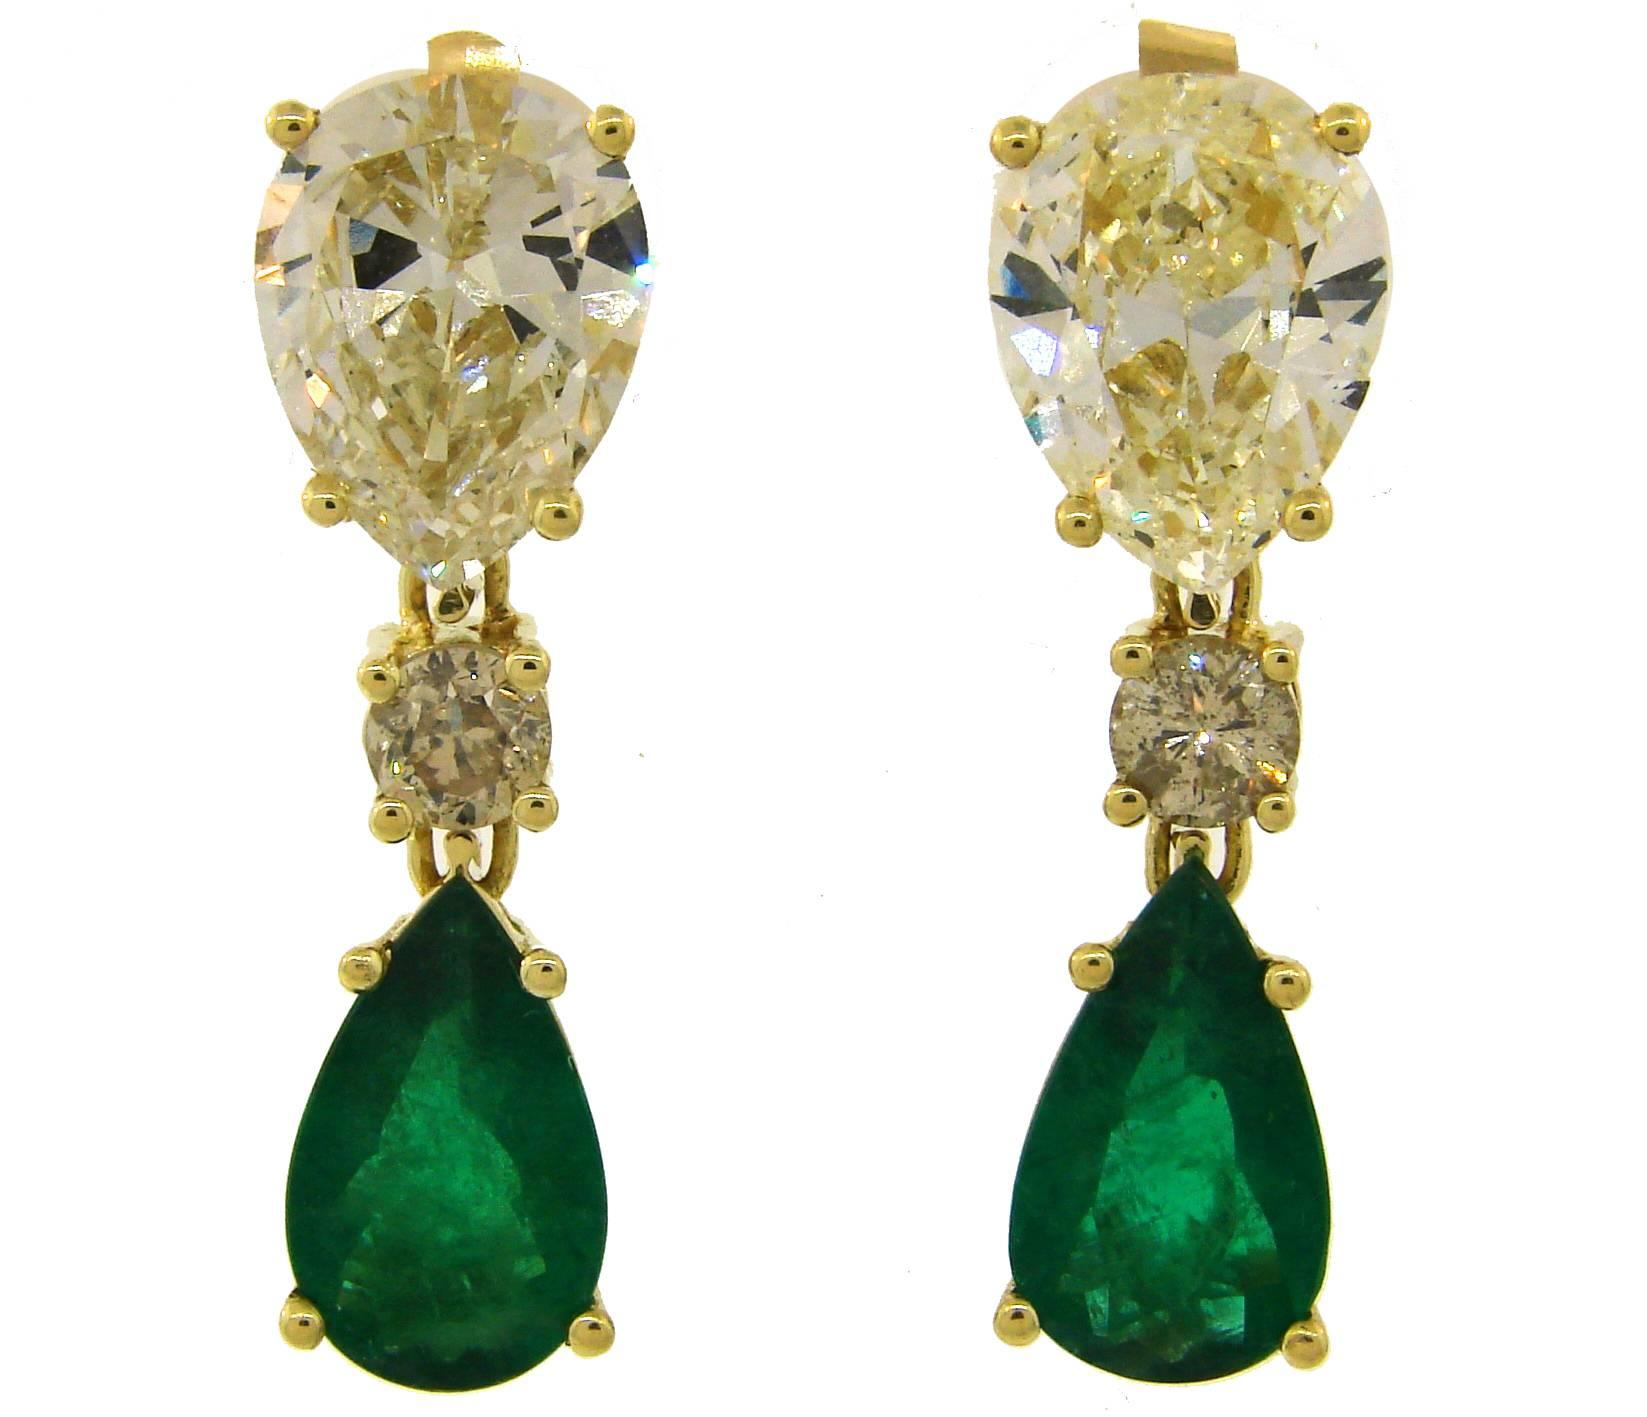 Classy and elegant pair of drop earrings that is a great addition to your jewelry collection. 
Feature a pear-shaped diamond and emerald connected with a round brilliant cut diamond set in 18 karat (tested) yellow gold. One earring holds 3.74-carat